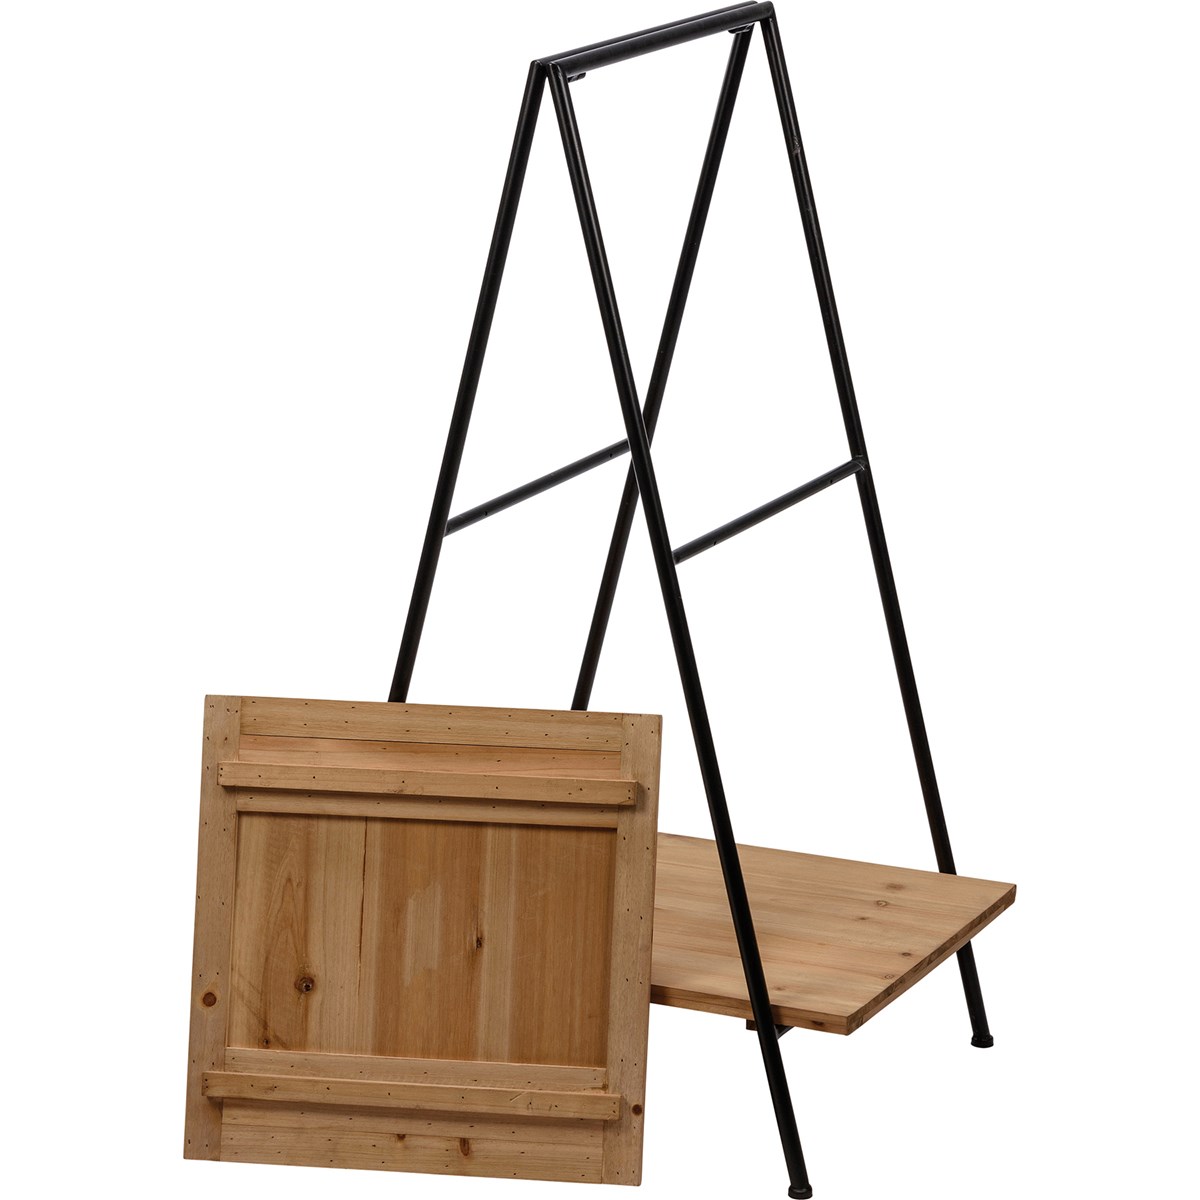 Two Tiered Wood Ladder Tray - Metal, Wood